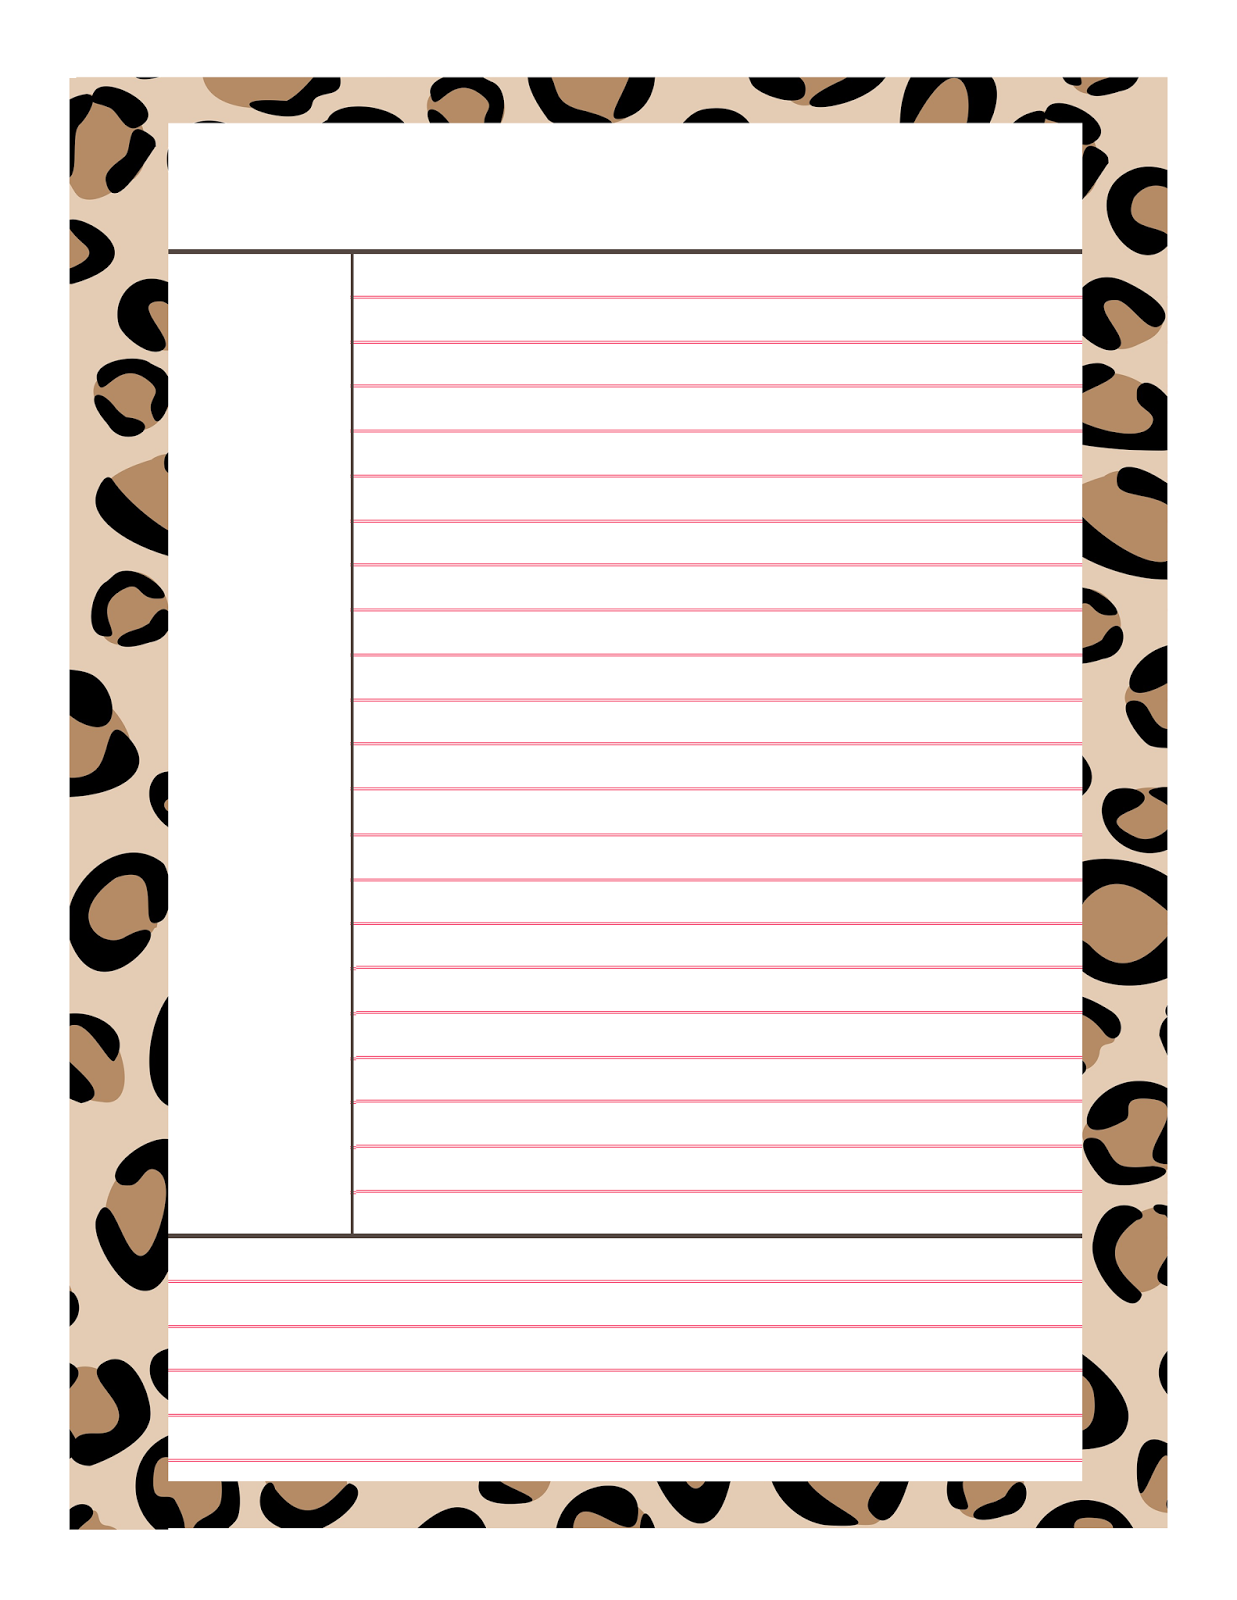 9-best-images-of-note-printable-template-cornell-note-paper-printable-cornell-note-taking